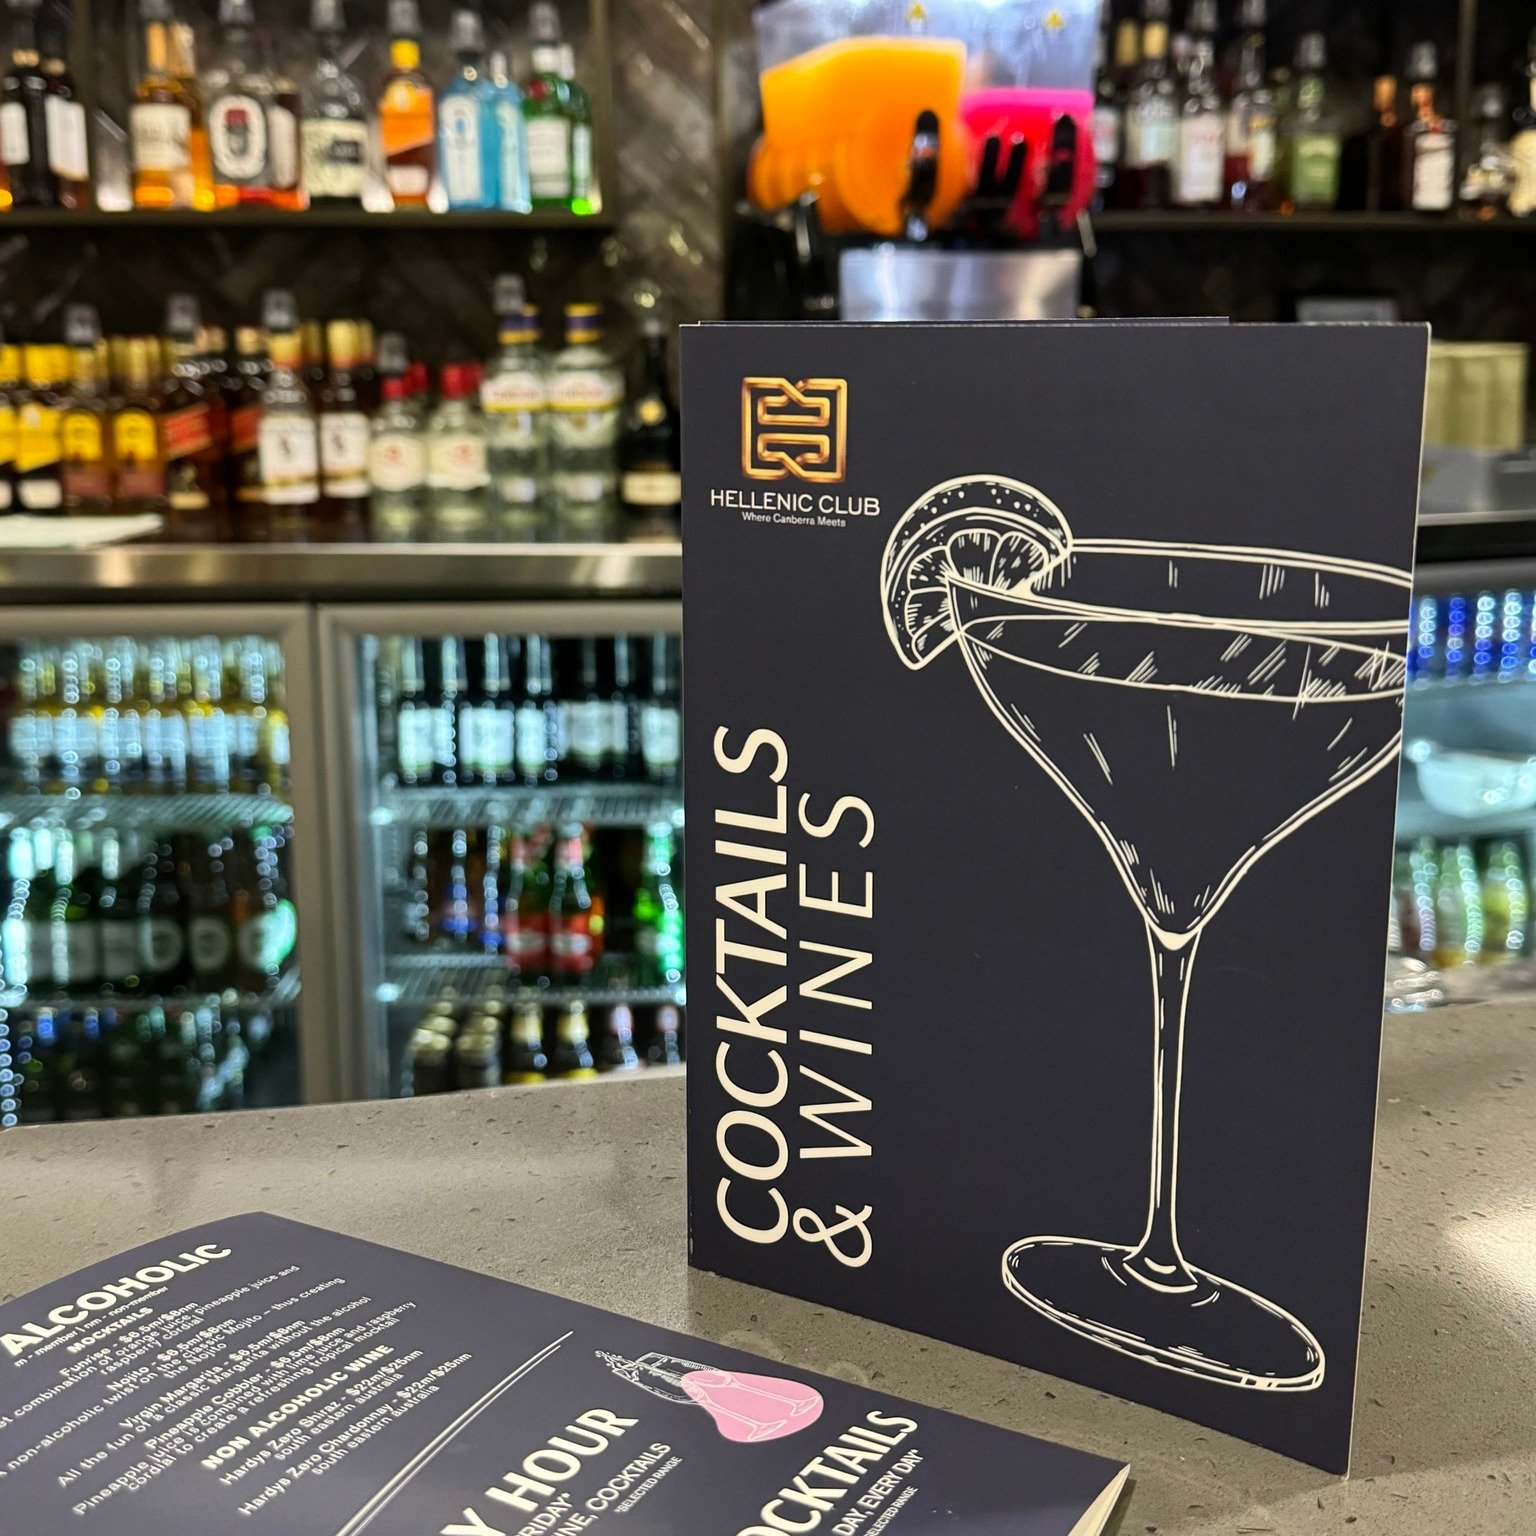 Our new Cocktail and Wine menu has arrived! 😍🎉

Featuring a tantalising lineup of innovative mocktails, exquisite new wines, and new &amp; classic cocktails that will elevate your sipping experience! 🥂

Plus, members enjoy a $1.50 discount on drin